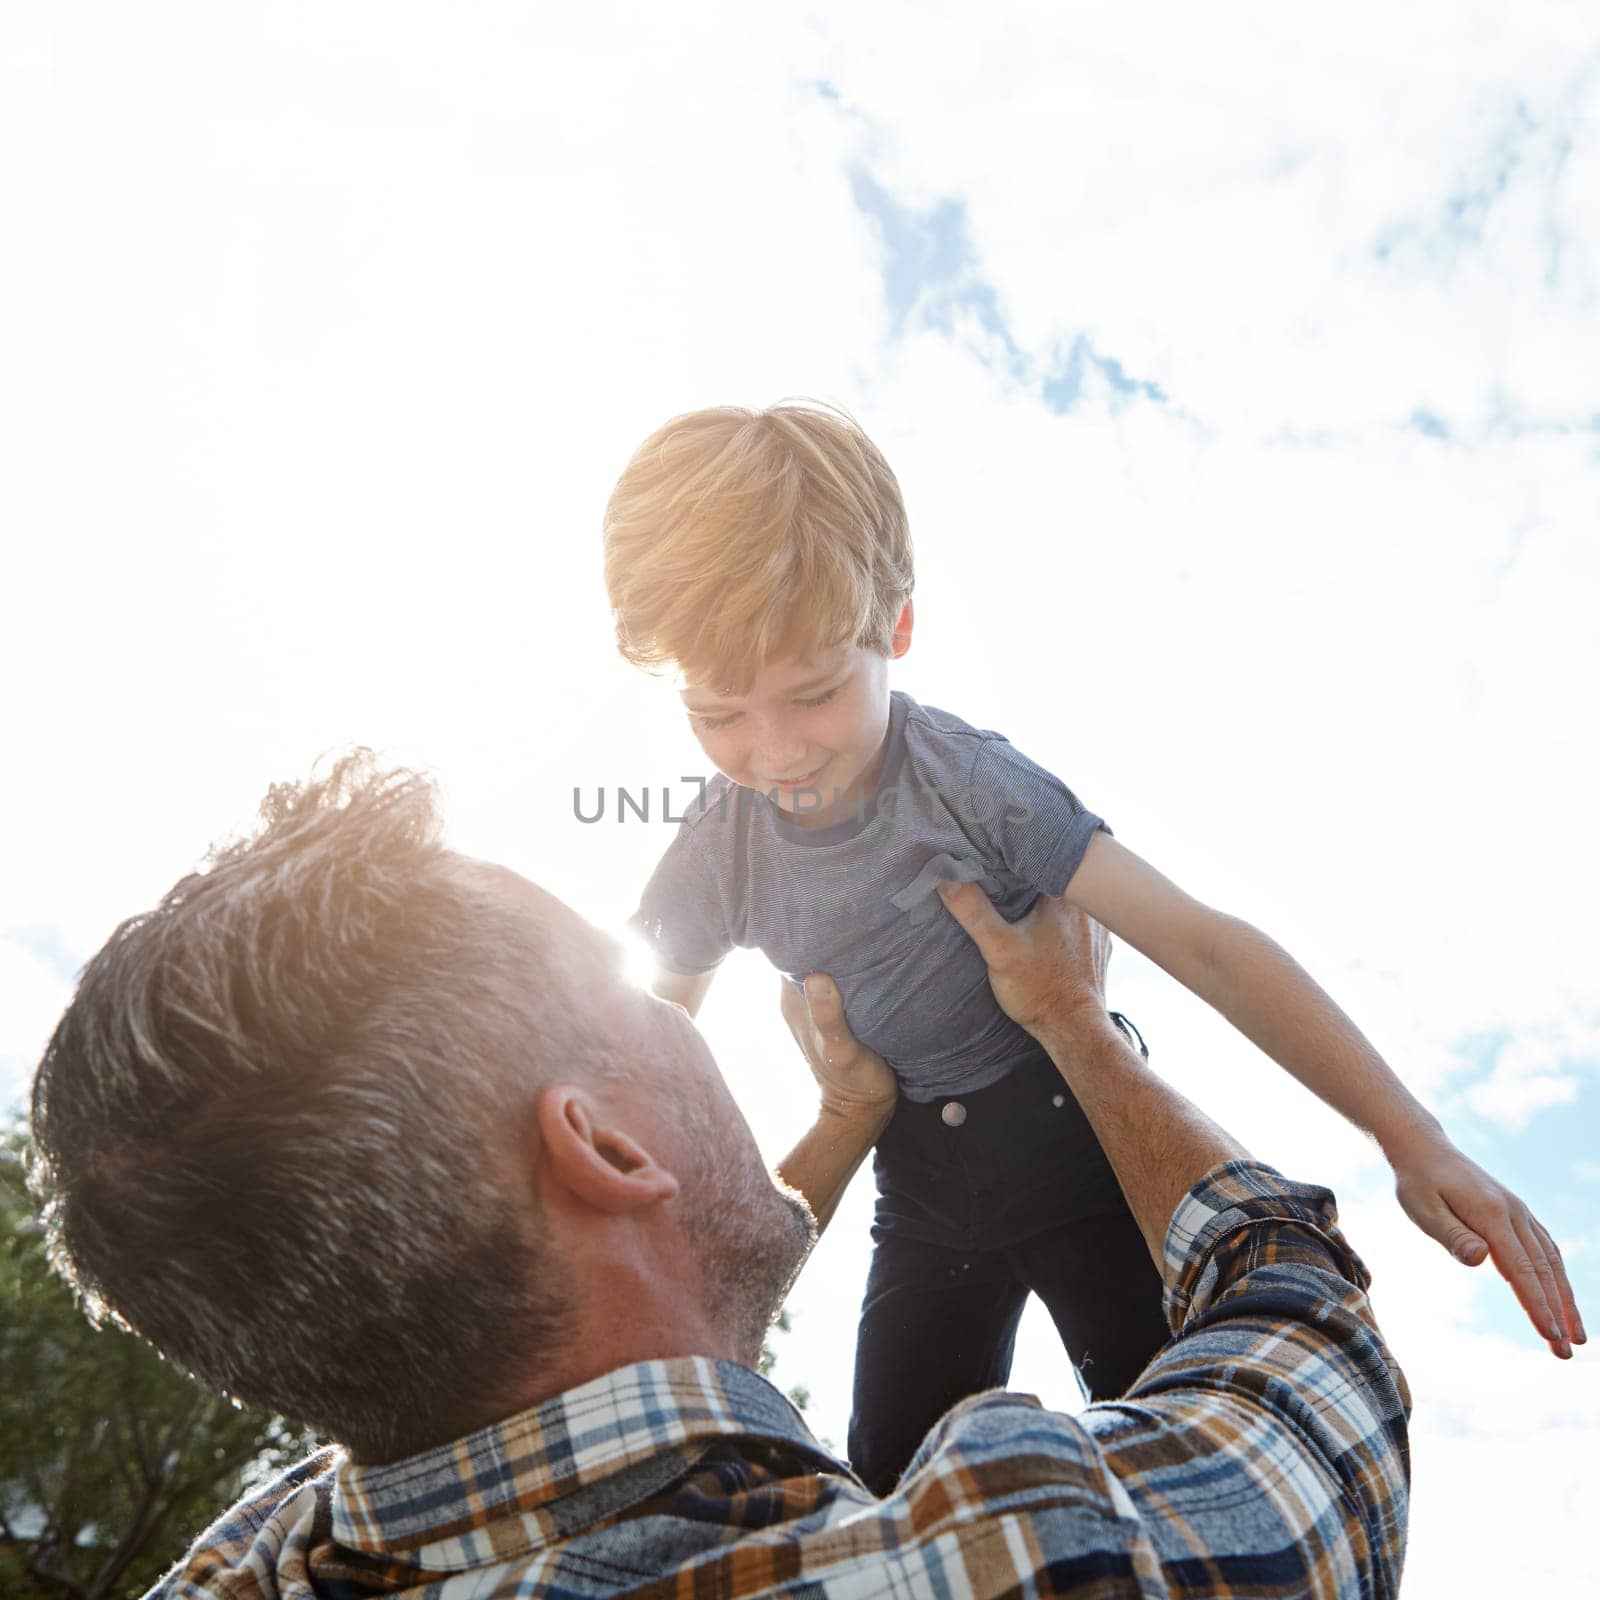 Raising him to incredible heights. a father lifting his son high into the air. by YuriArcurs